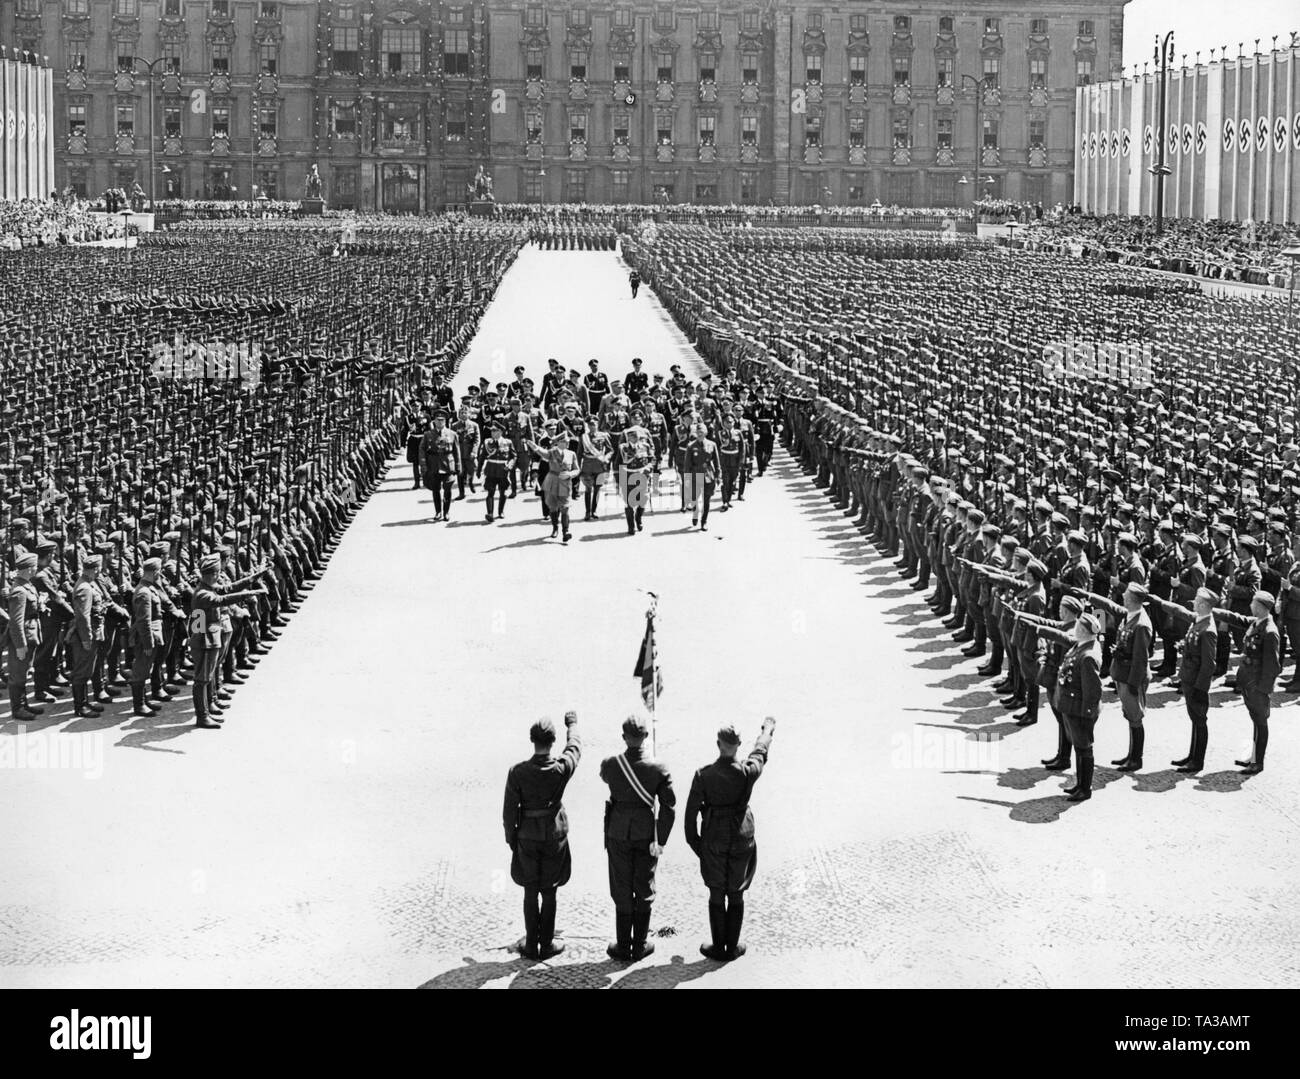 Adolf Hitler and Field Marshal General Hermann Goering (middle, the first row), along with other prominent figures (including Major General Wolfram von Riochthofen, Grand Admiral Erich Raeder, General Wilhelm Keitel, General der Flieger Hugo Sperrle, SS leader Heinrich Himmler), are marching through the Lustgarten in Berlin-Mitte among the lines of the Condor Legion (giving the Hitler salute) towards the lectern in front of the Altes Museum. They are received by color guards of the Legion. In the background, the facade of the Berlin Palace. Stock Photo